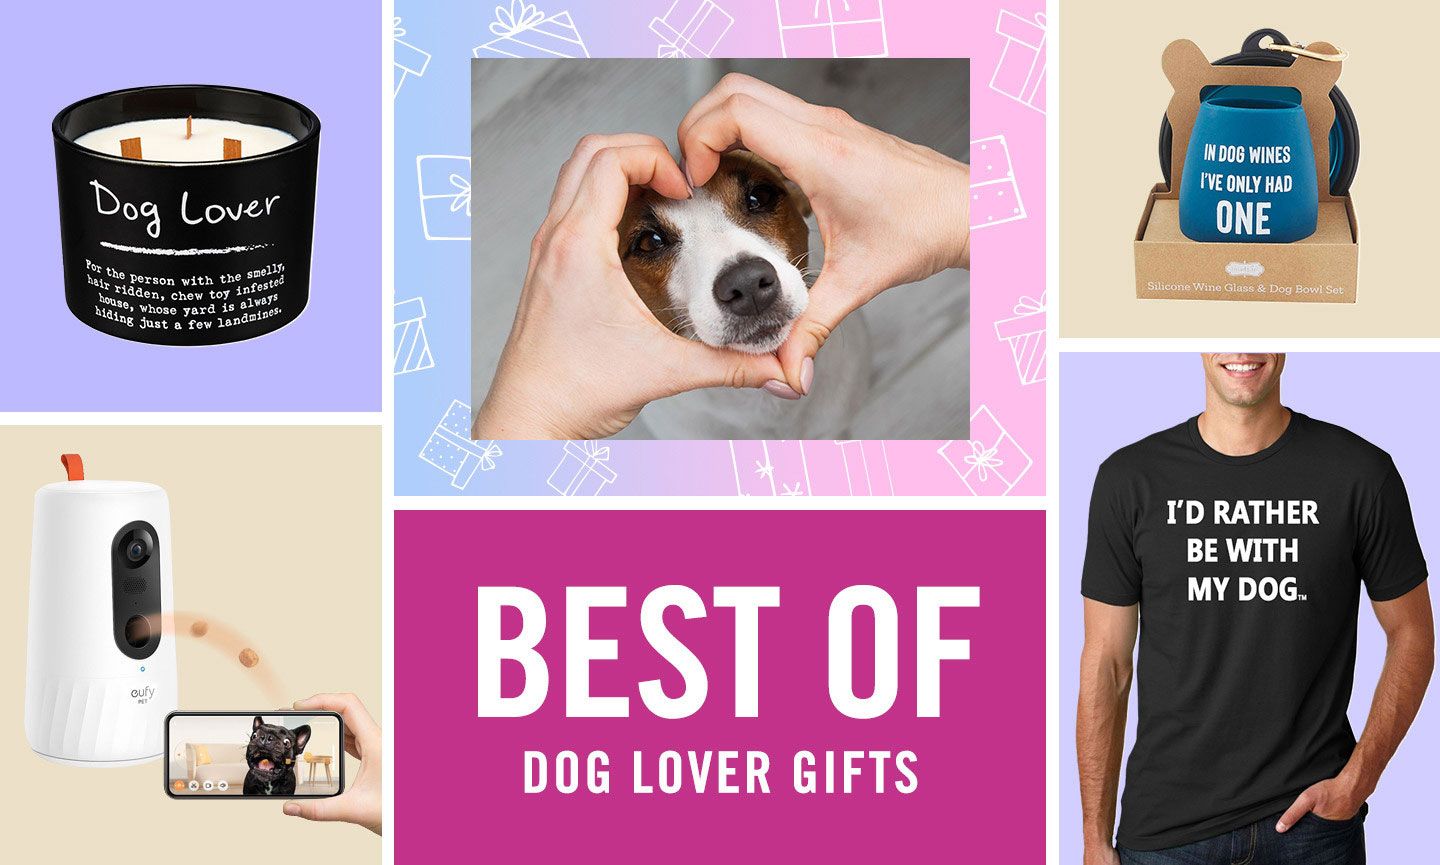 Gifts for Dog Lovers: Chewy, Furbo, and More